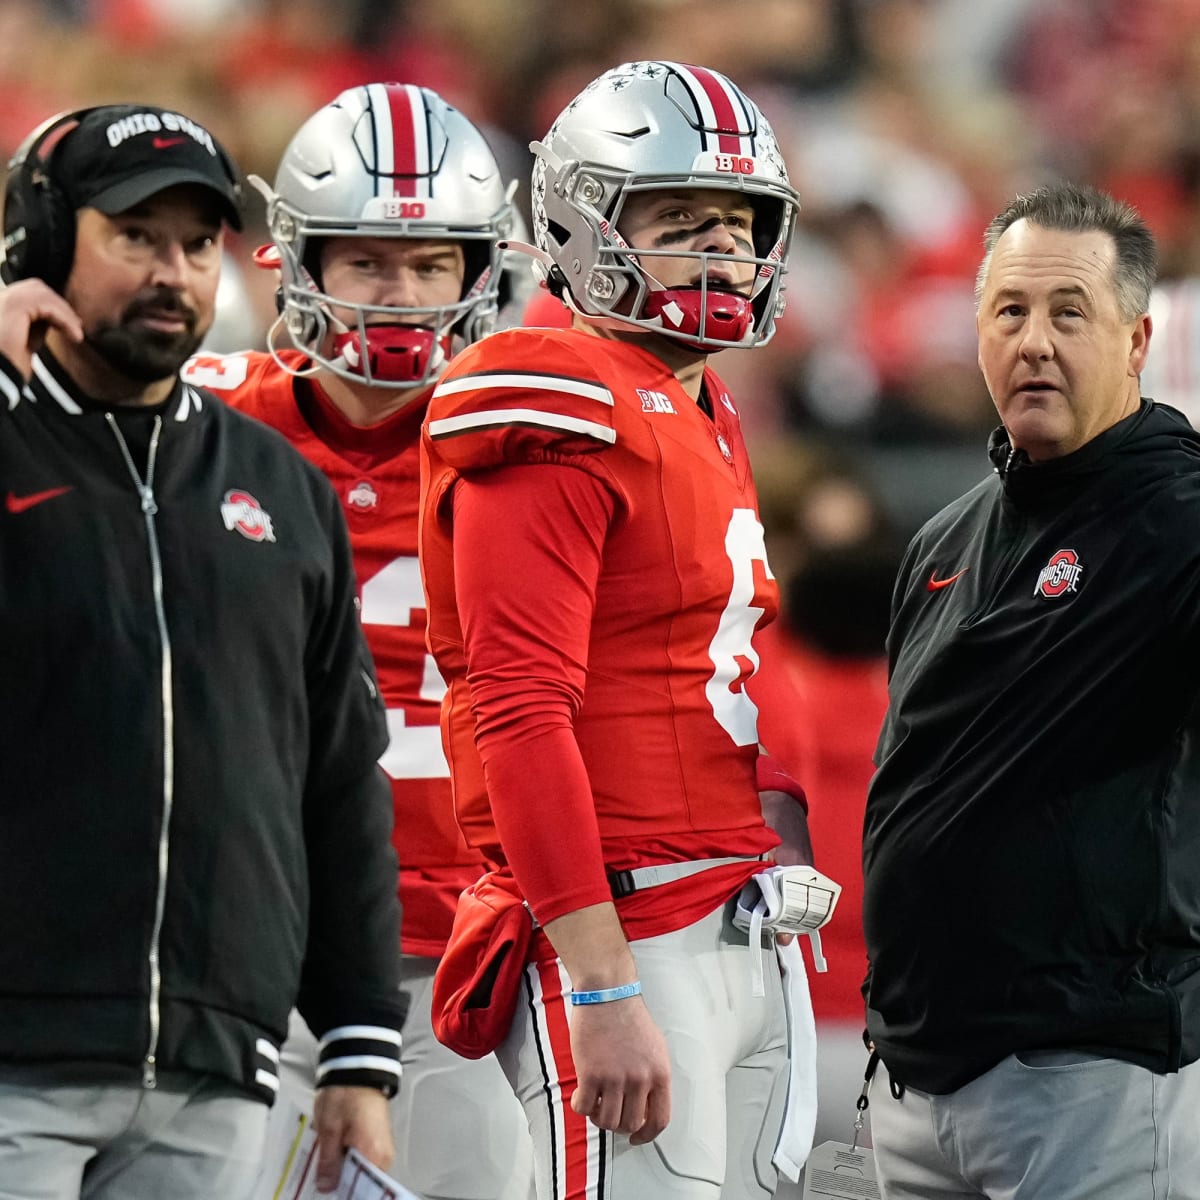 Ohio State's quarterback search and the impact of the transfer